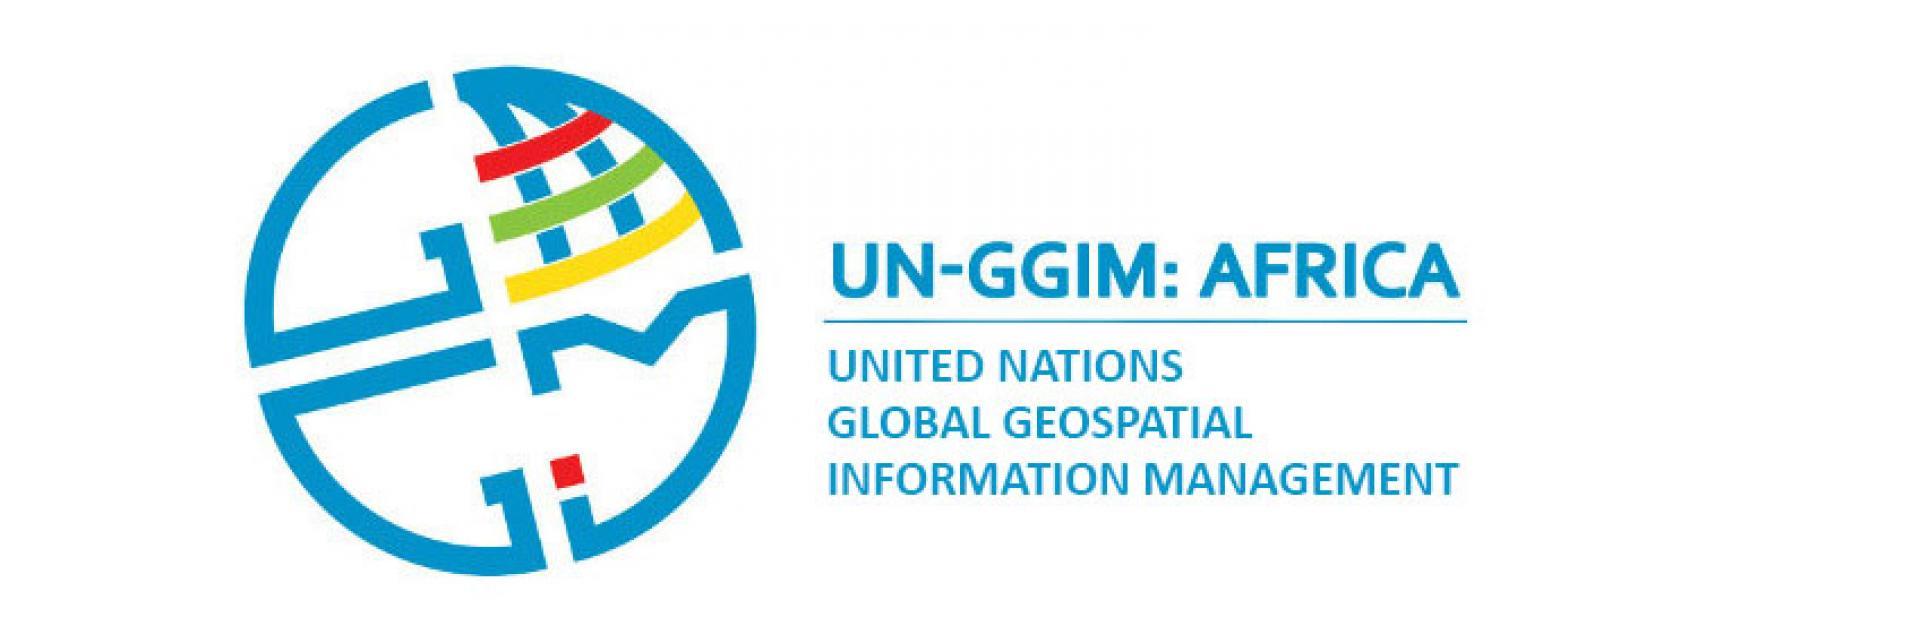 Ninth Meeting of the United Nations Global Geospatial Information Management for Africa (UN-GGIM: Africa)